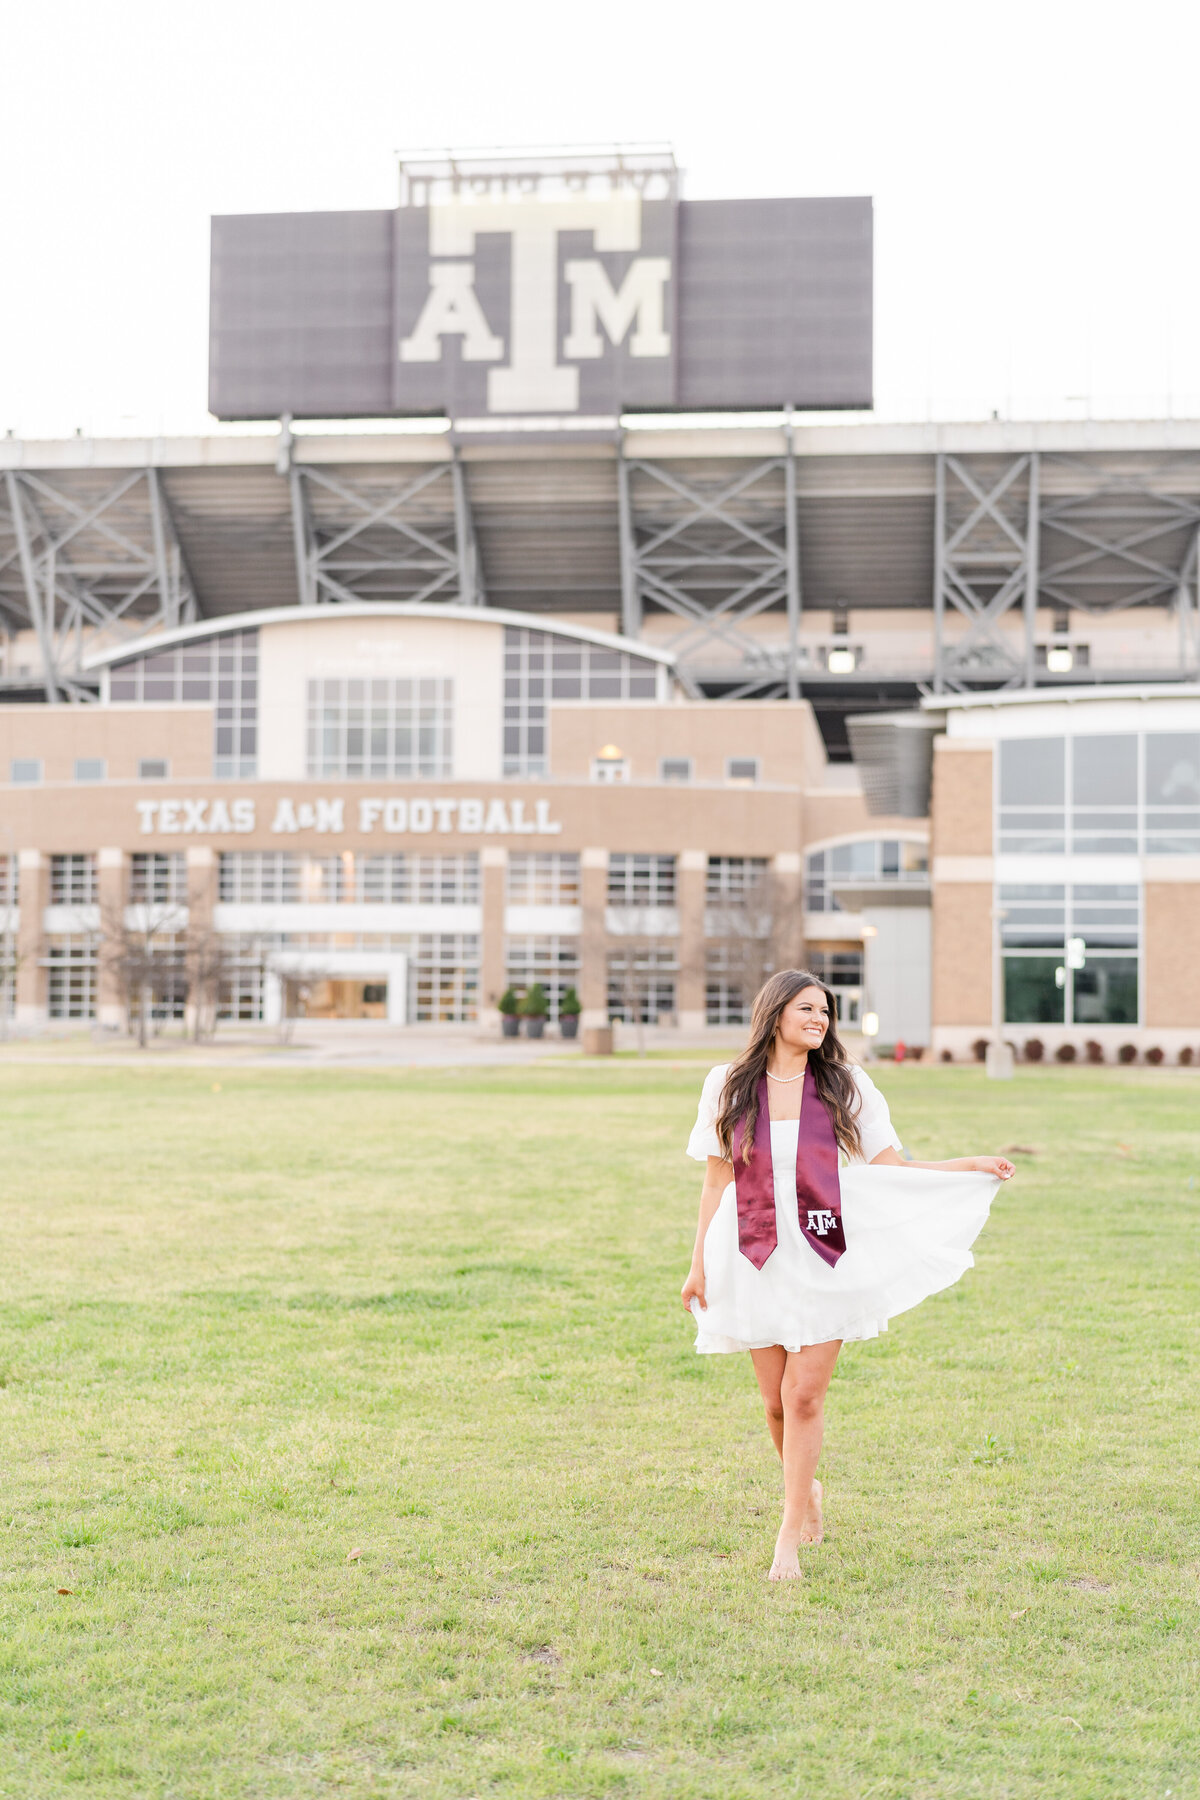 Texas A&M senior girl running through field in fluffy white dress while wearing Aggie stole with Kyle Field in background